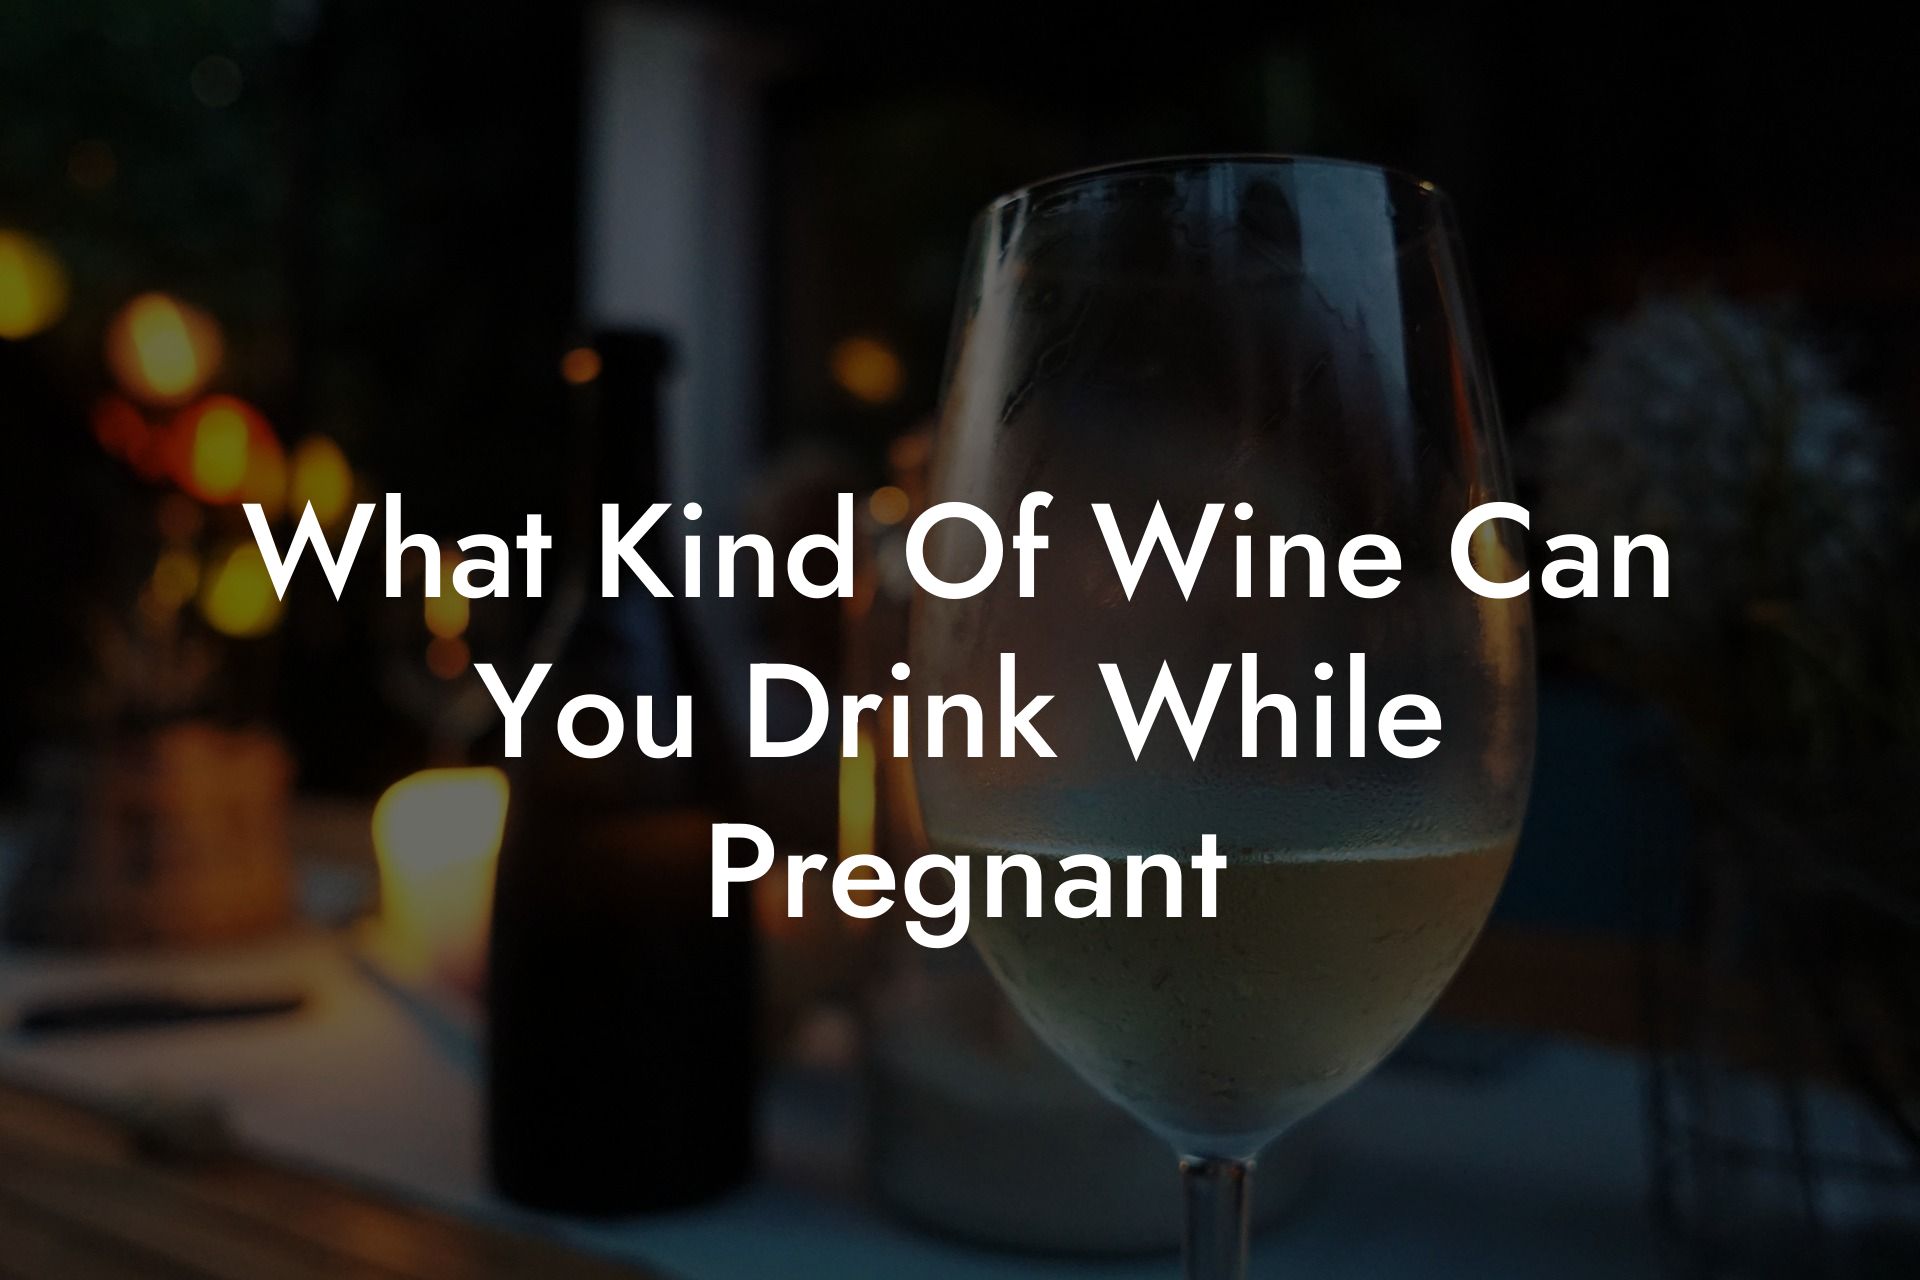 What Kind Of Wine Can You Drink While Pregnant